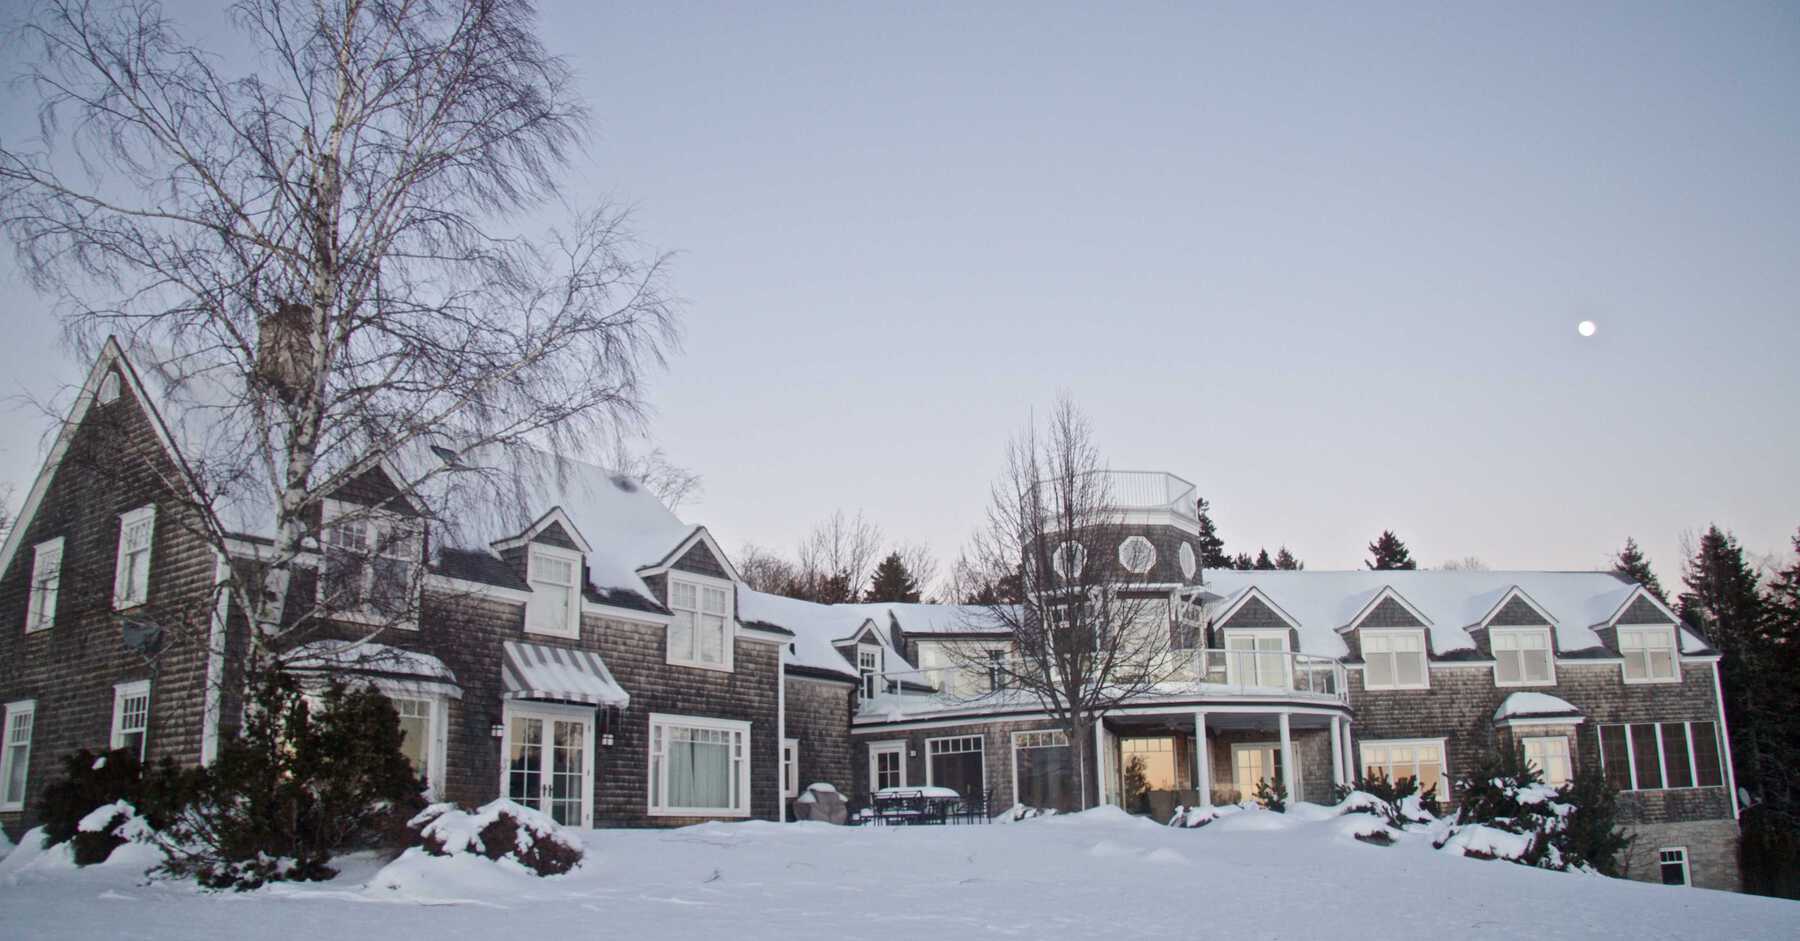 Large house in snow